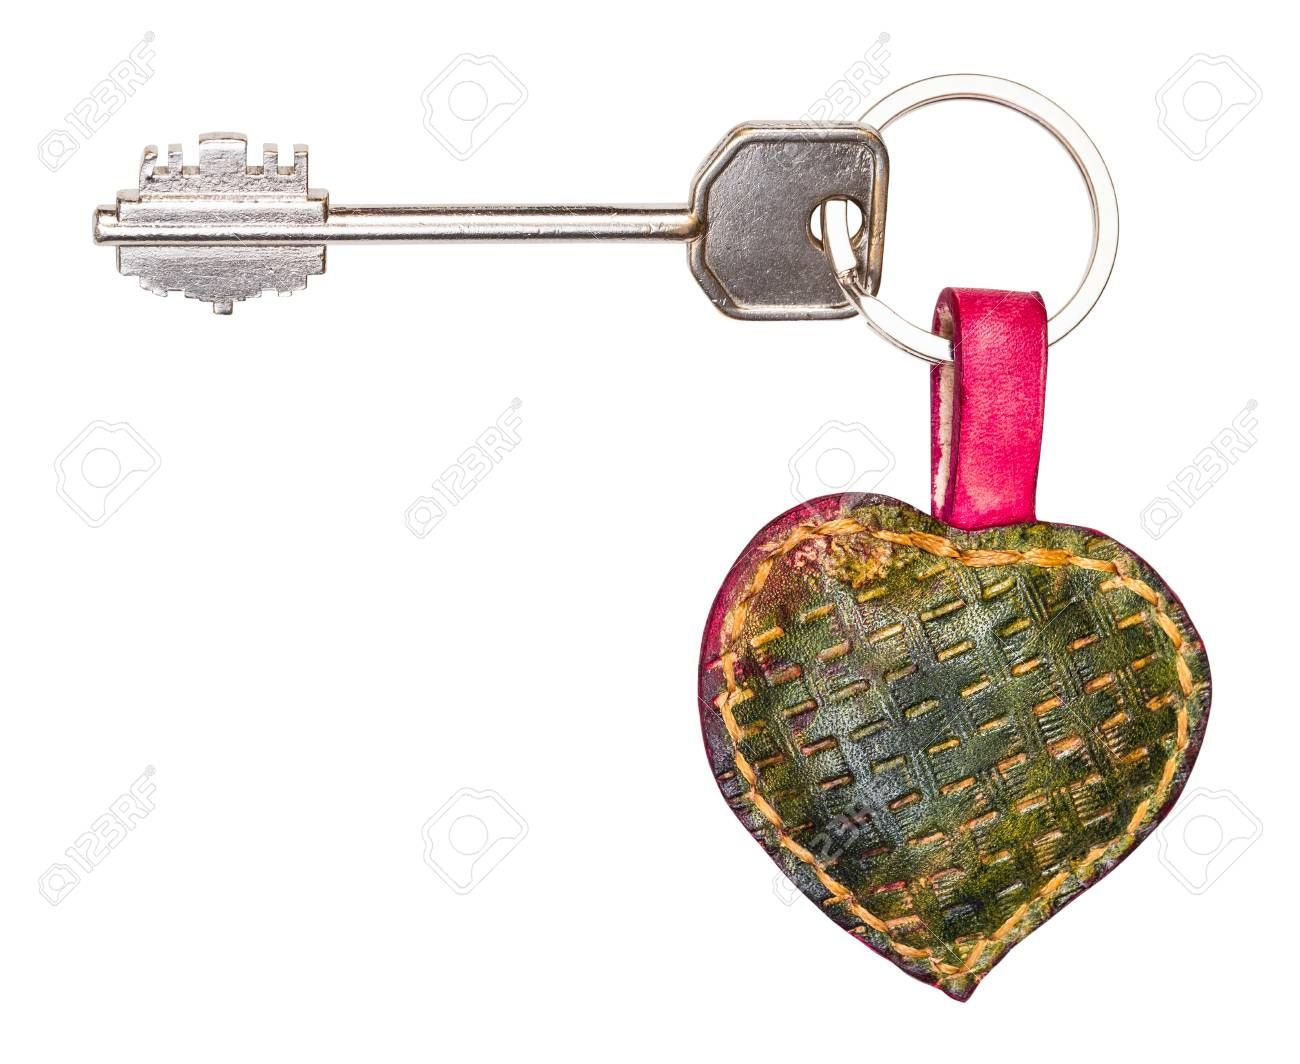 Stock Photo With Regard To Current Heart Shaped Padlock Rings (View 24 of 25)